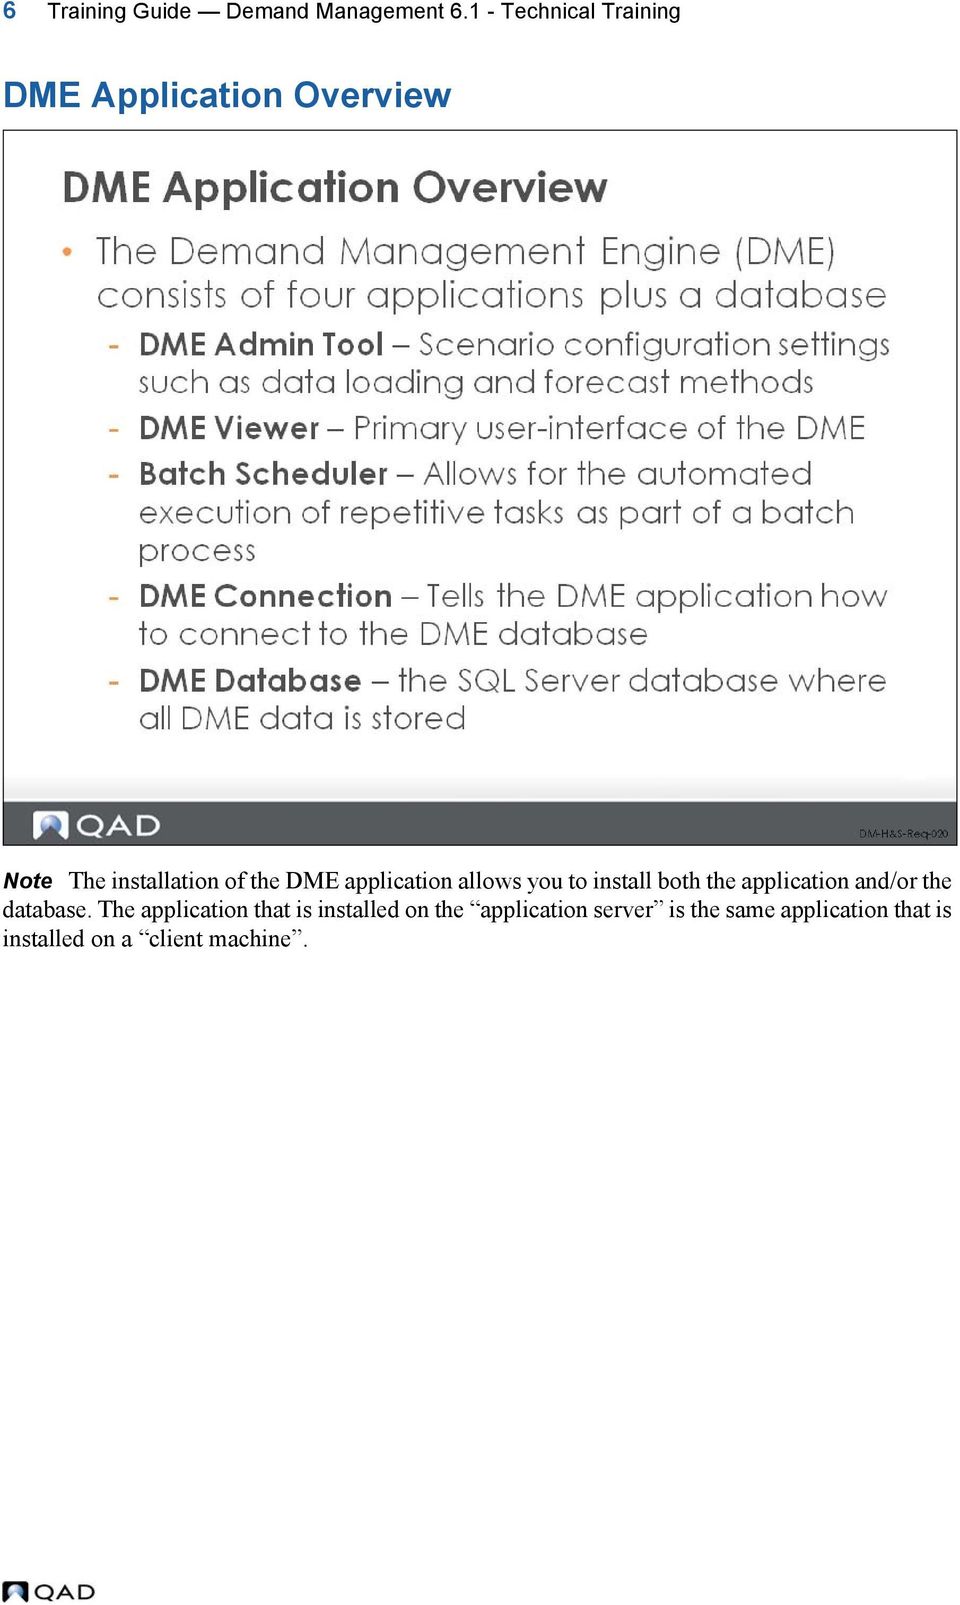 DME application allows you to install both the application and/or the database.